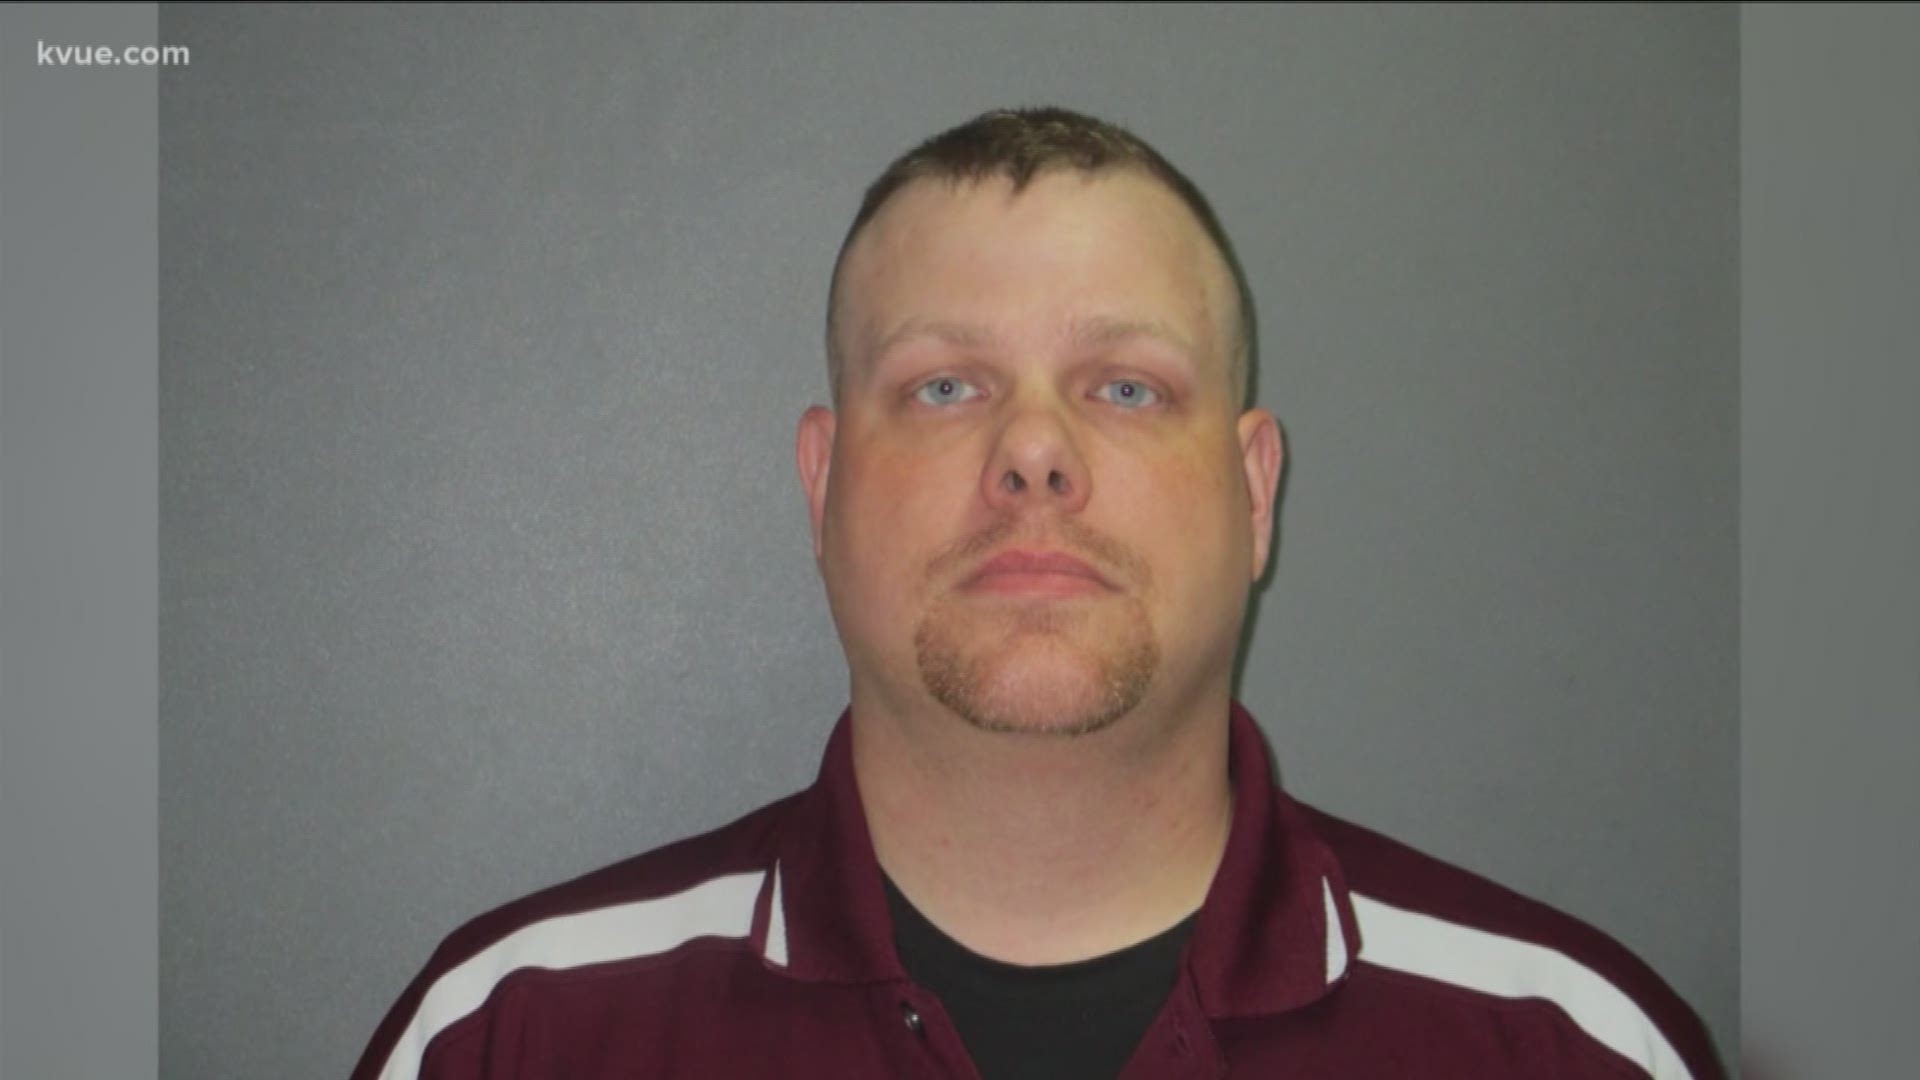 A former Burnet police sergeant has been charged with murder. Police say he shot and killed a man who ran over his foot in March.